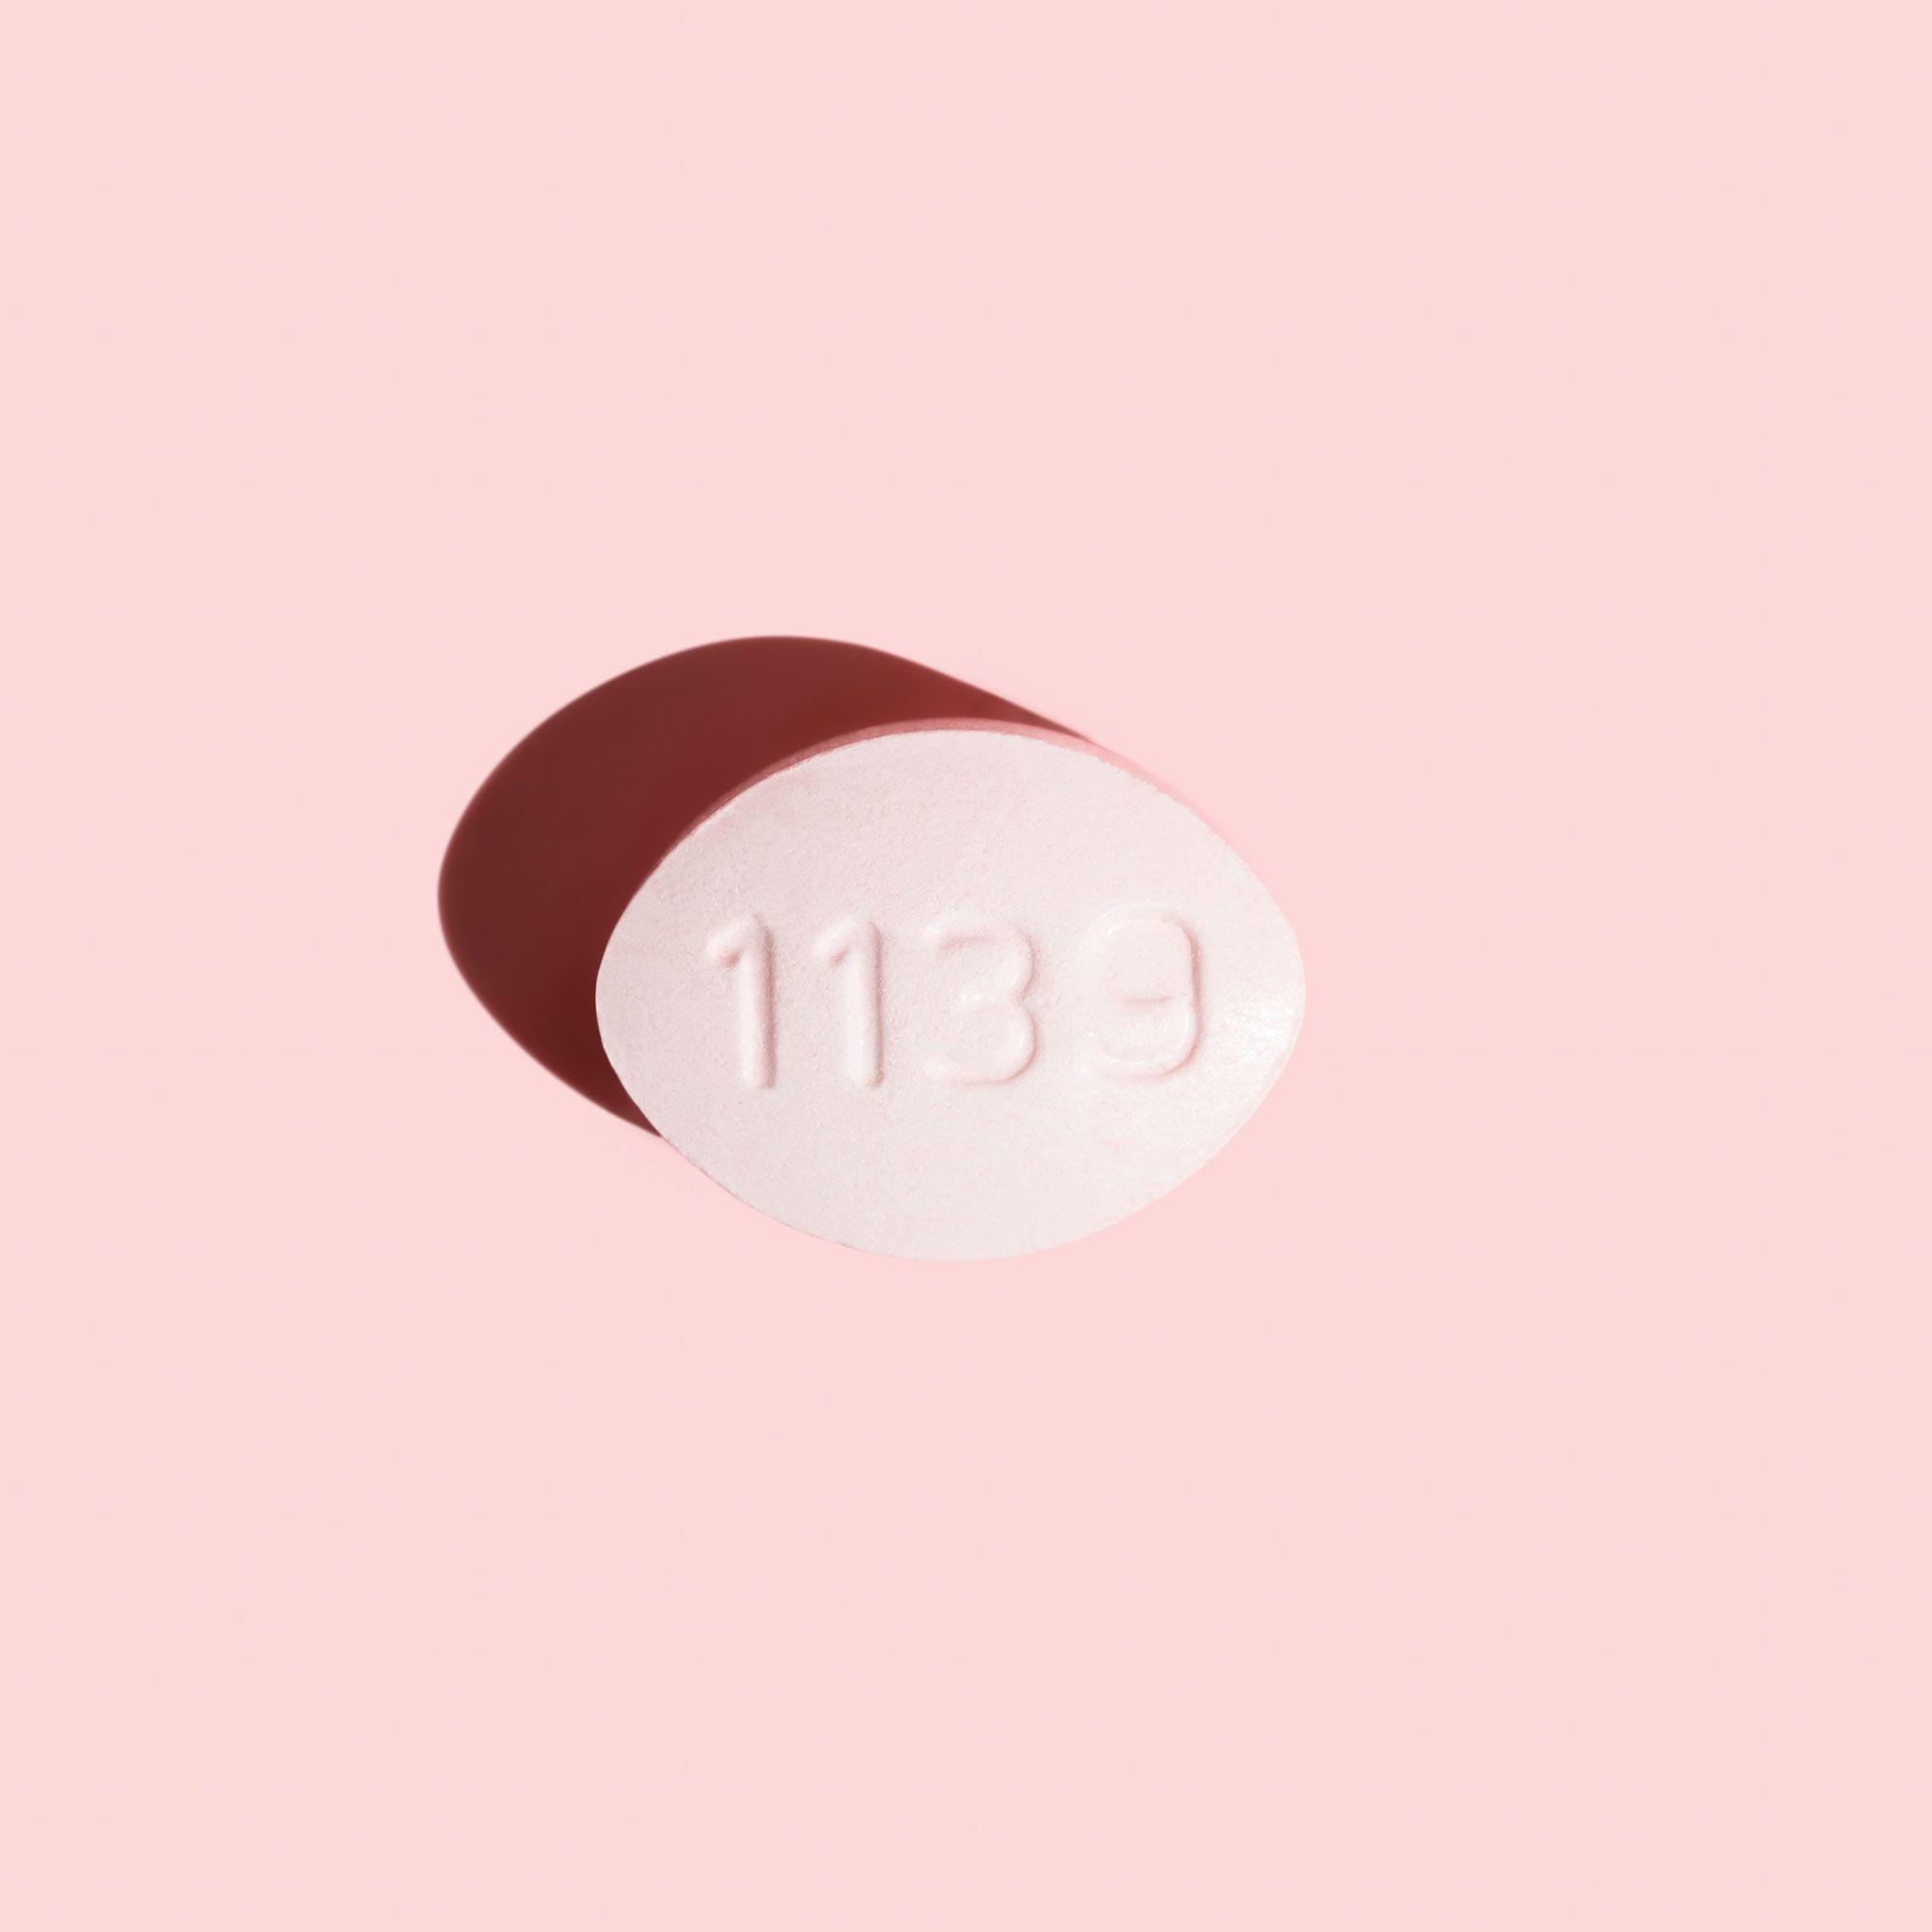 Antifungal pill to treat yeast infections on a pink background